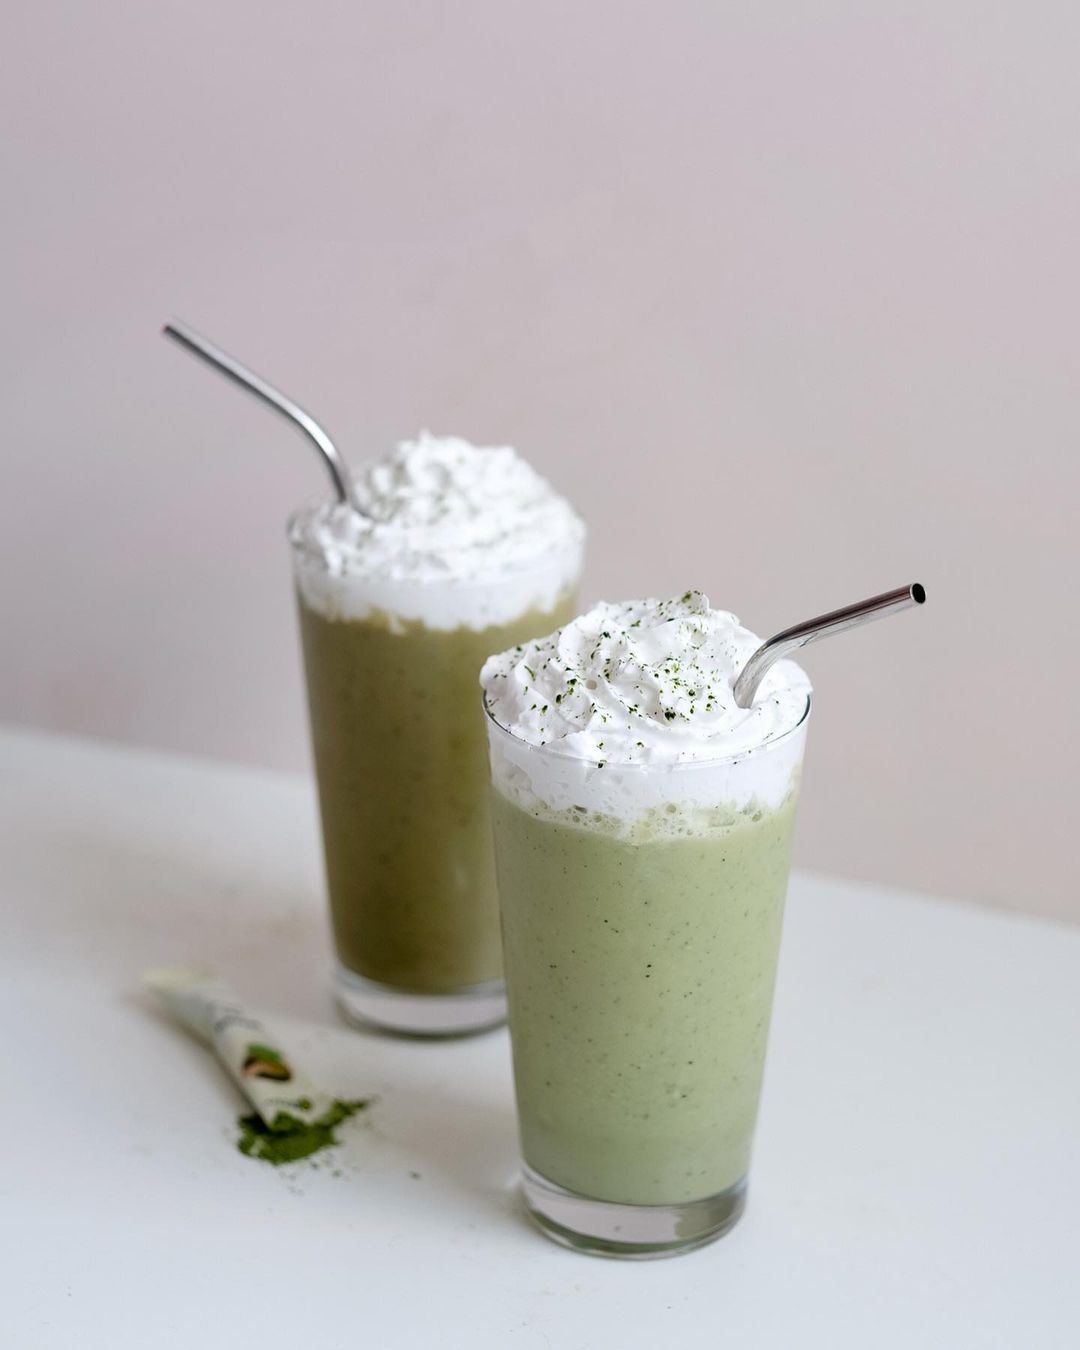 Celebrate St. Patrick’s Day with This Perfectly Festive Drink